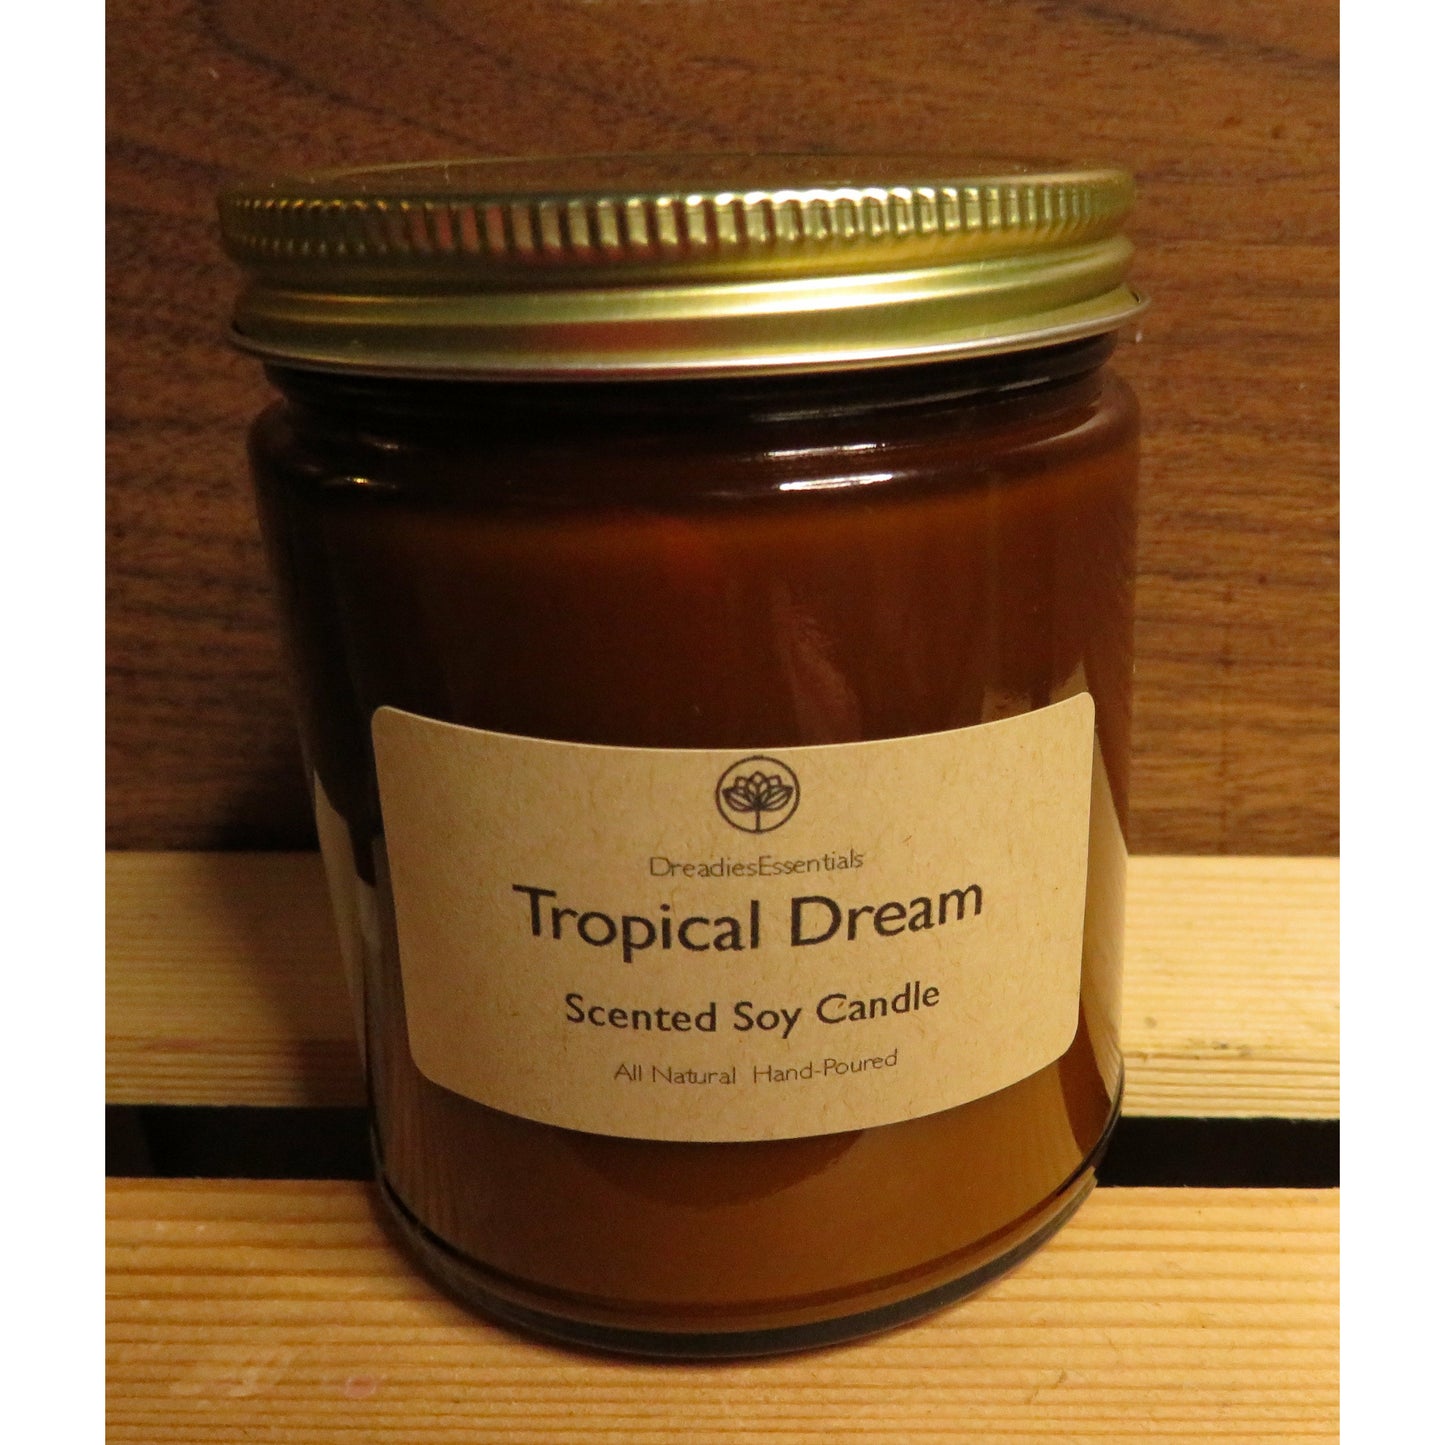 Tropical Dream Scented Soy Candle